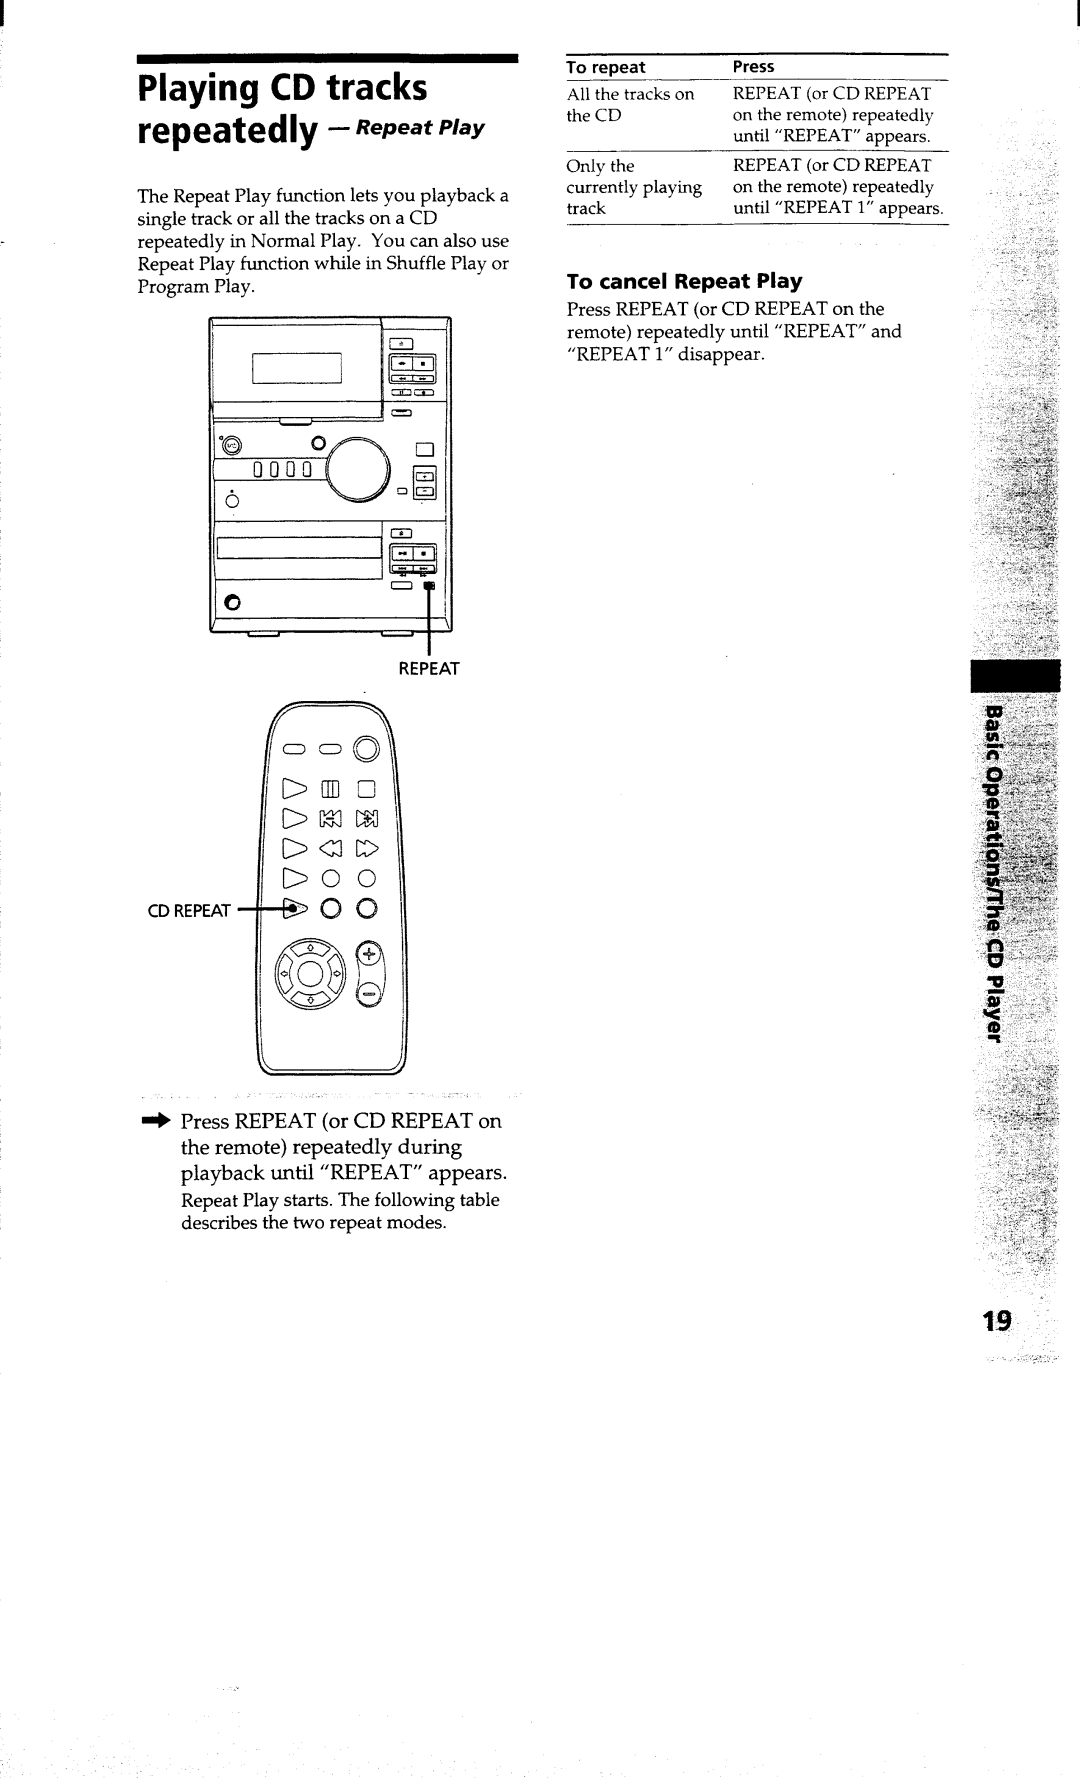 Sony CMT-CP1 manual 